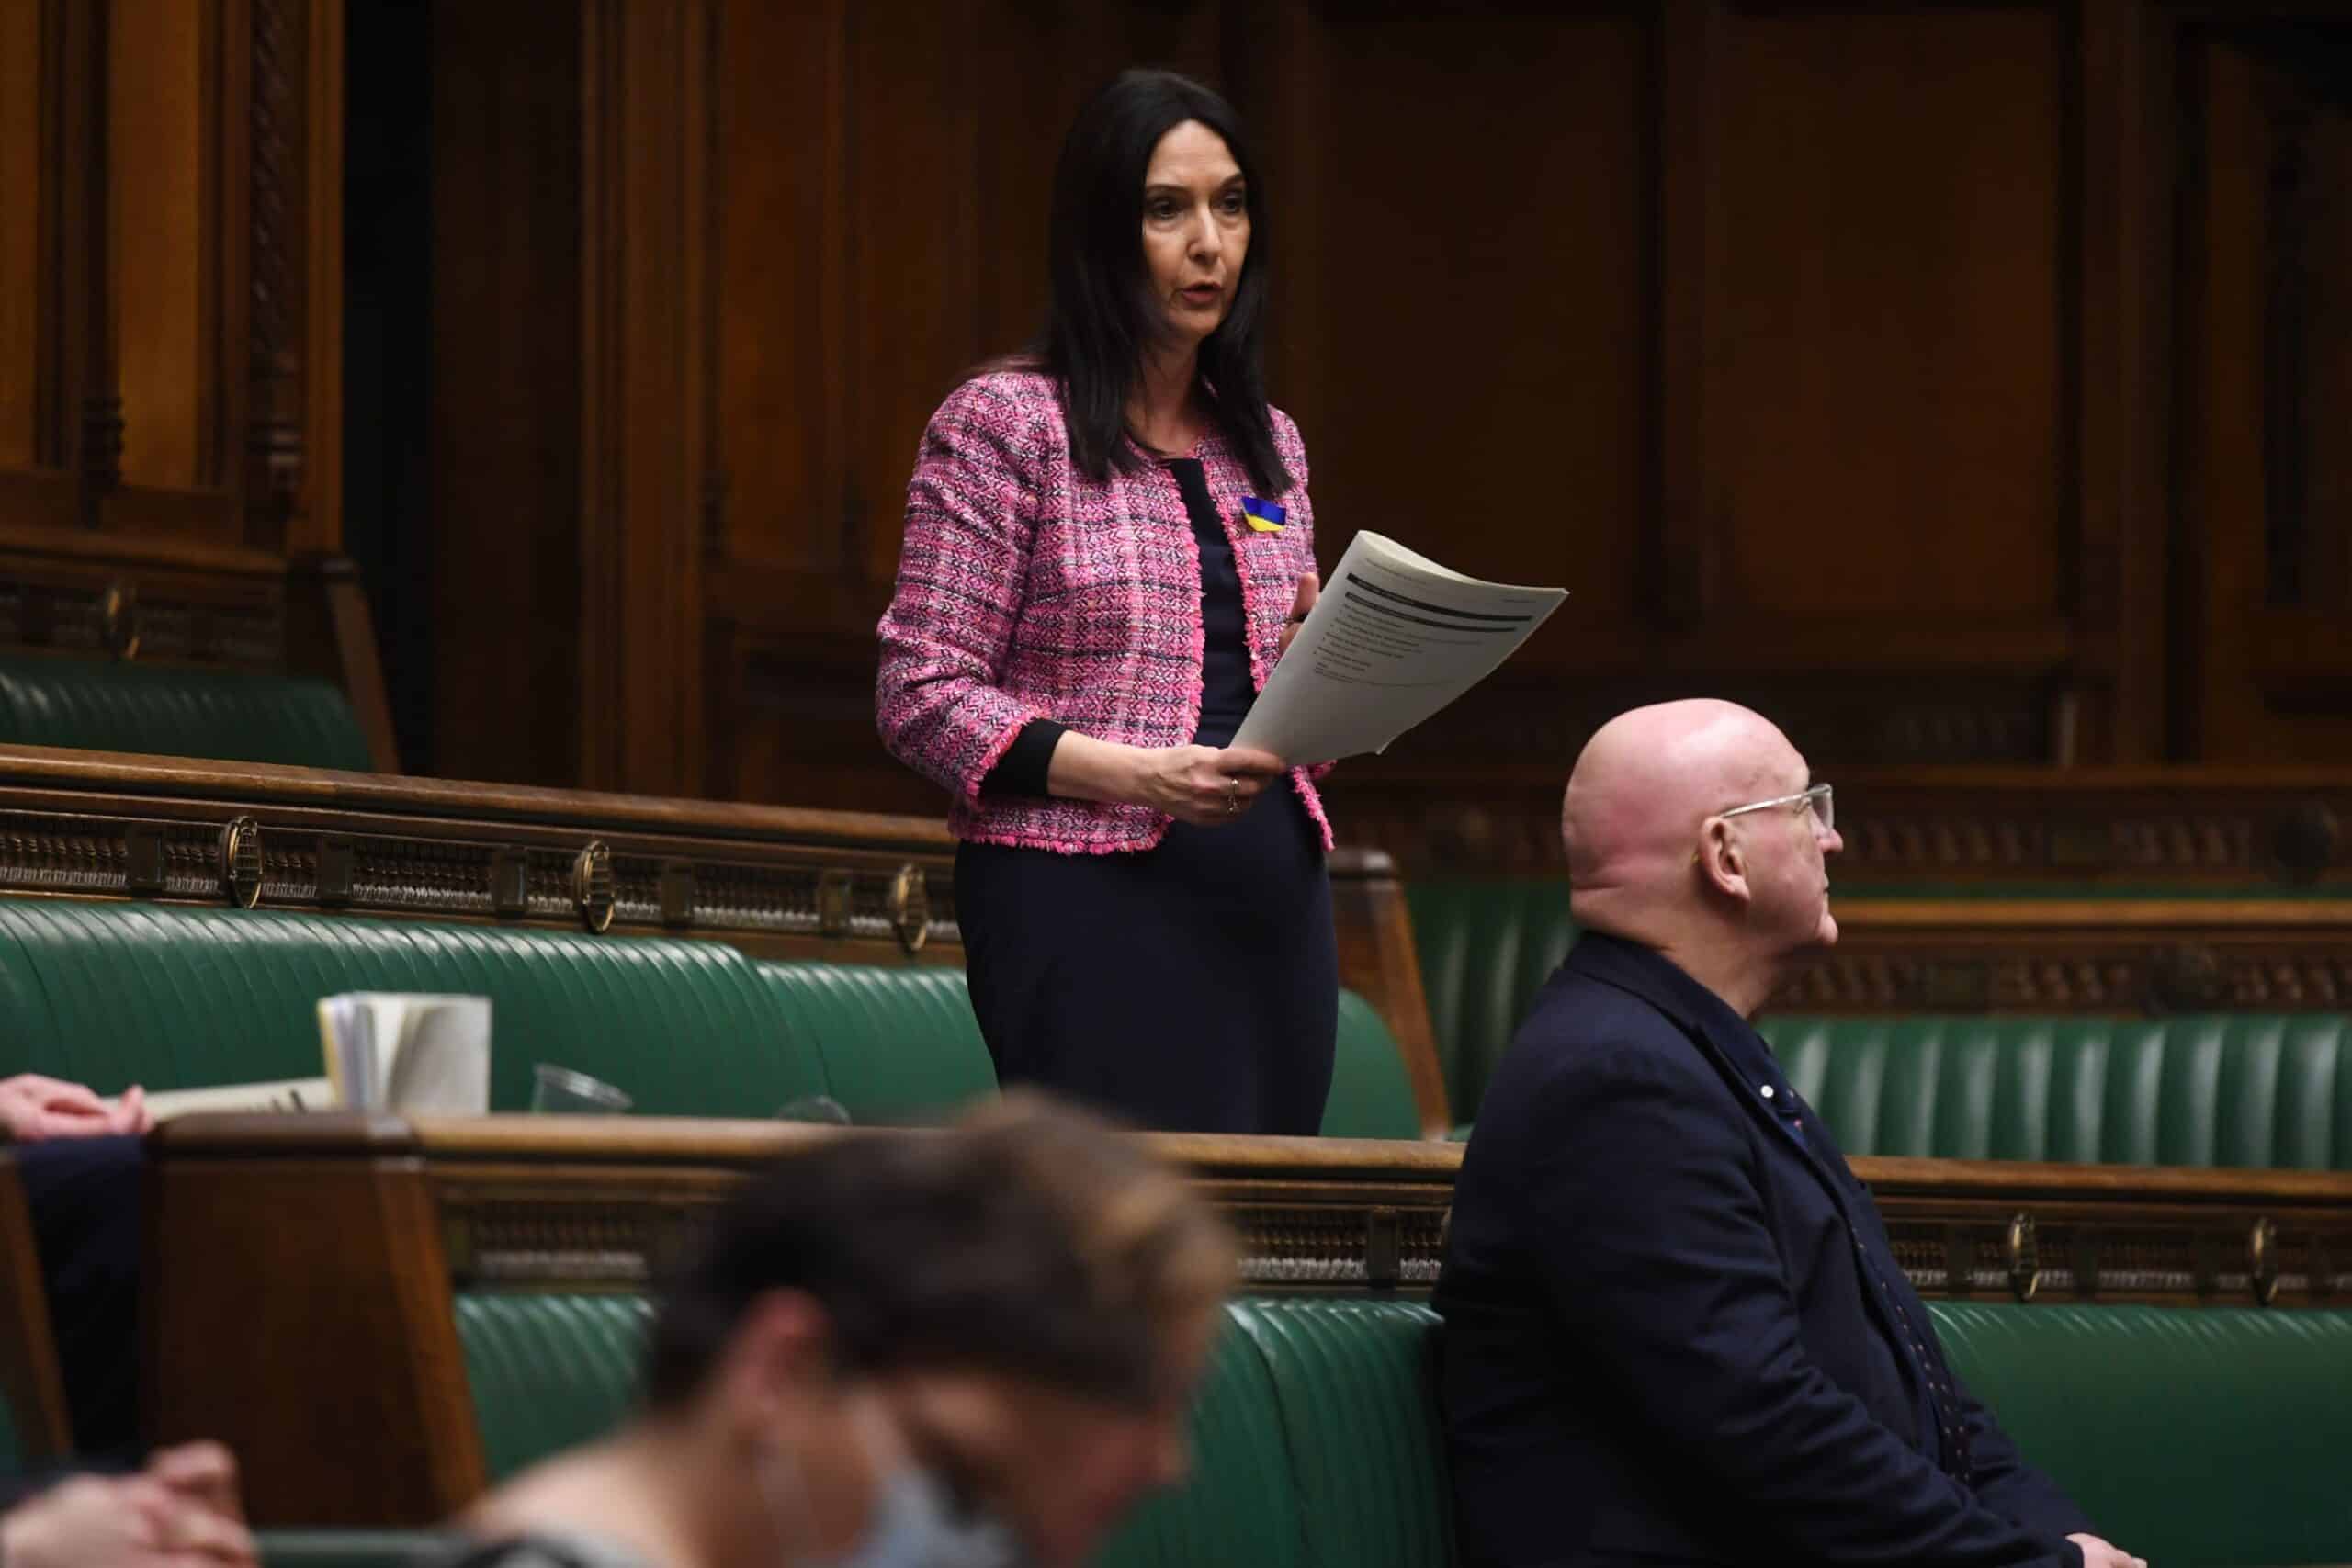 By-election looms as Margaret Ferrier suspended from House of Commons